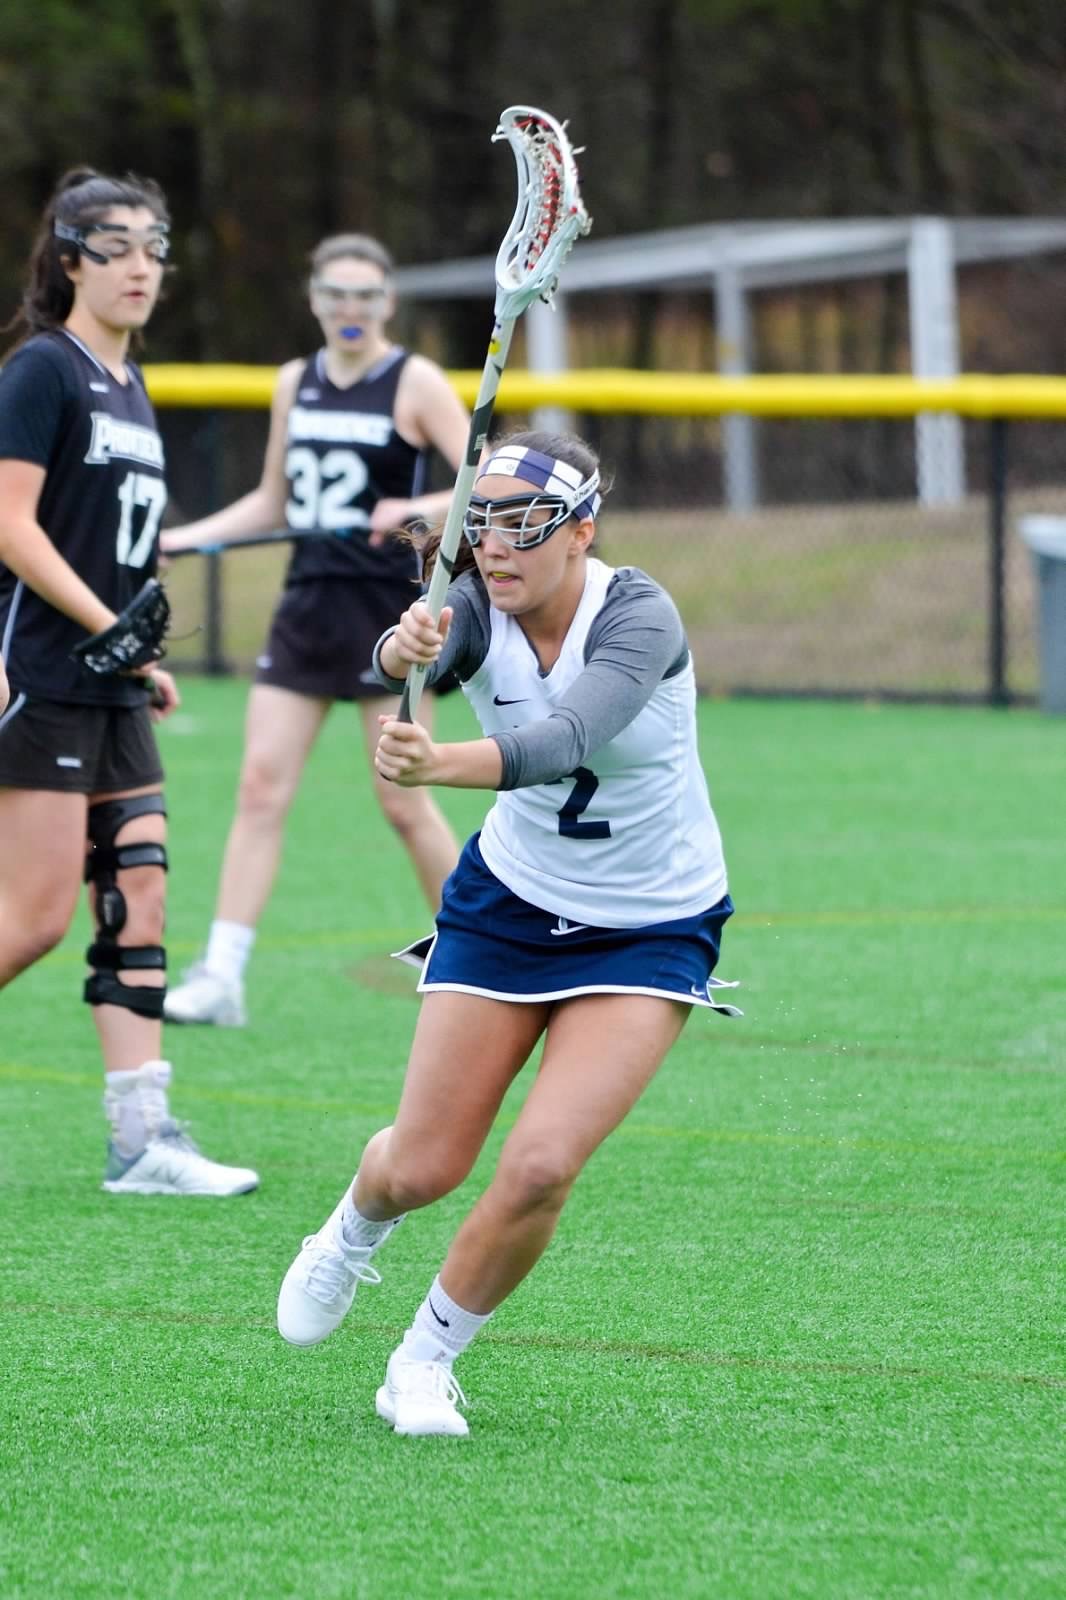 UNH women's club lacrosse player running